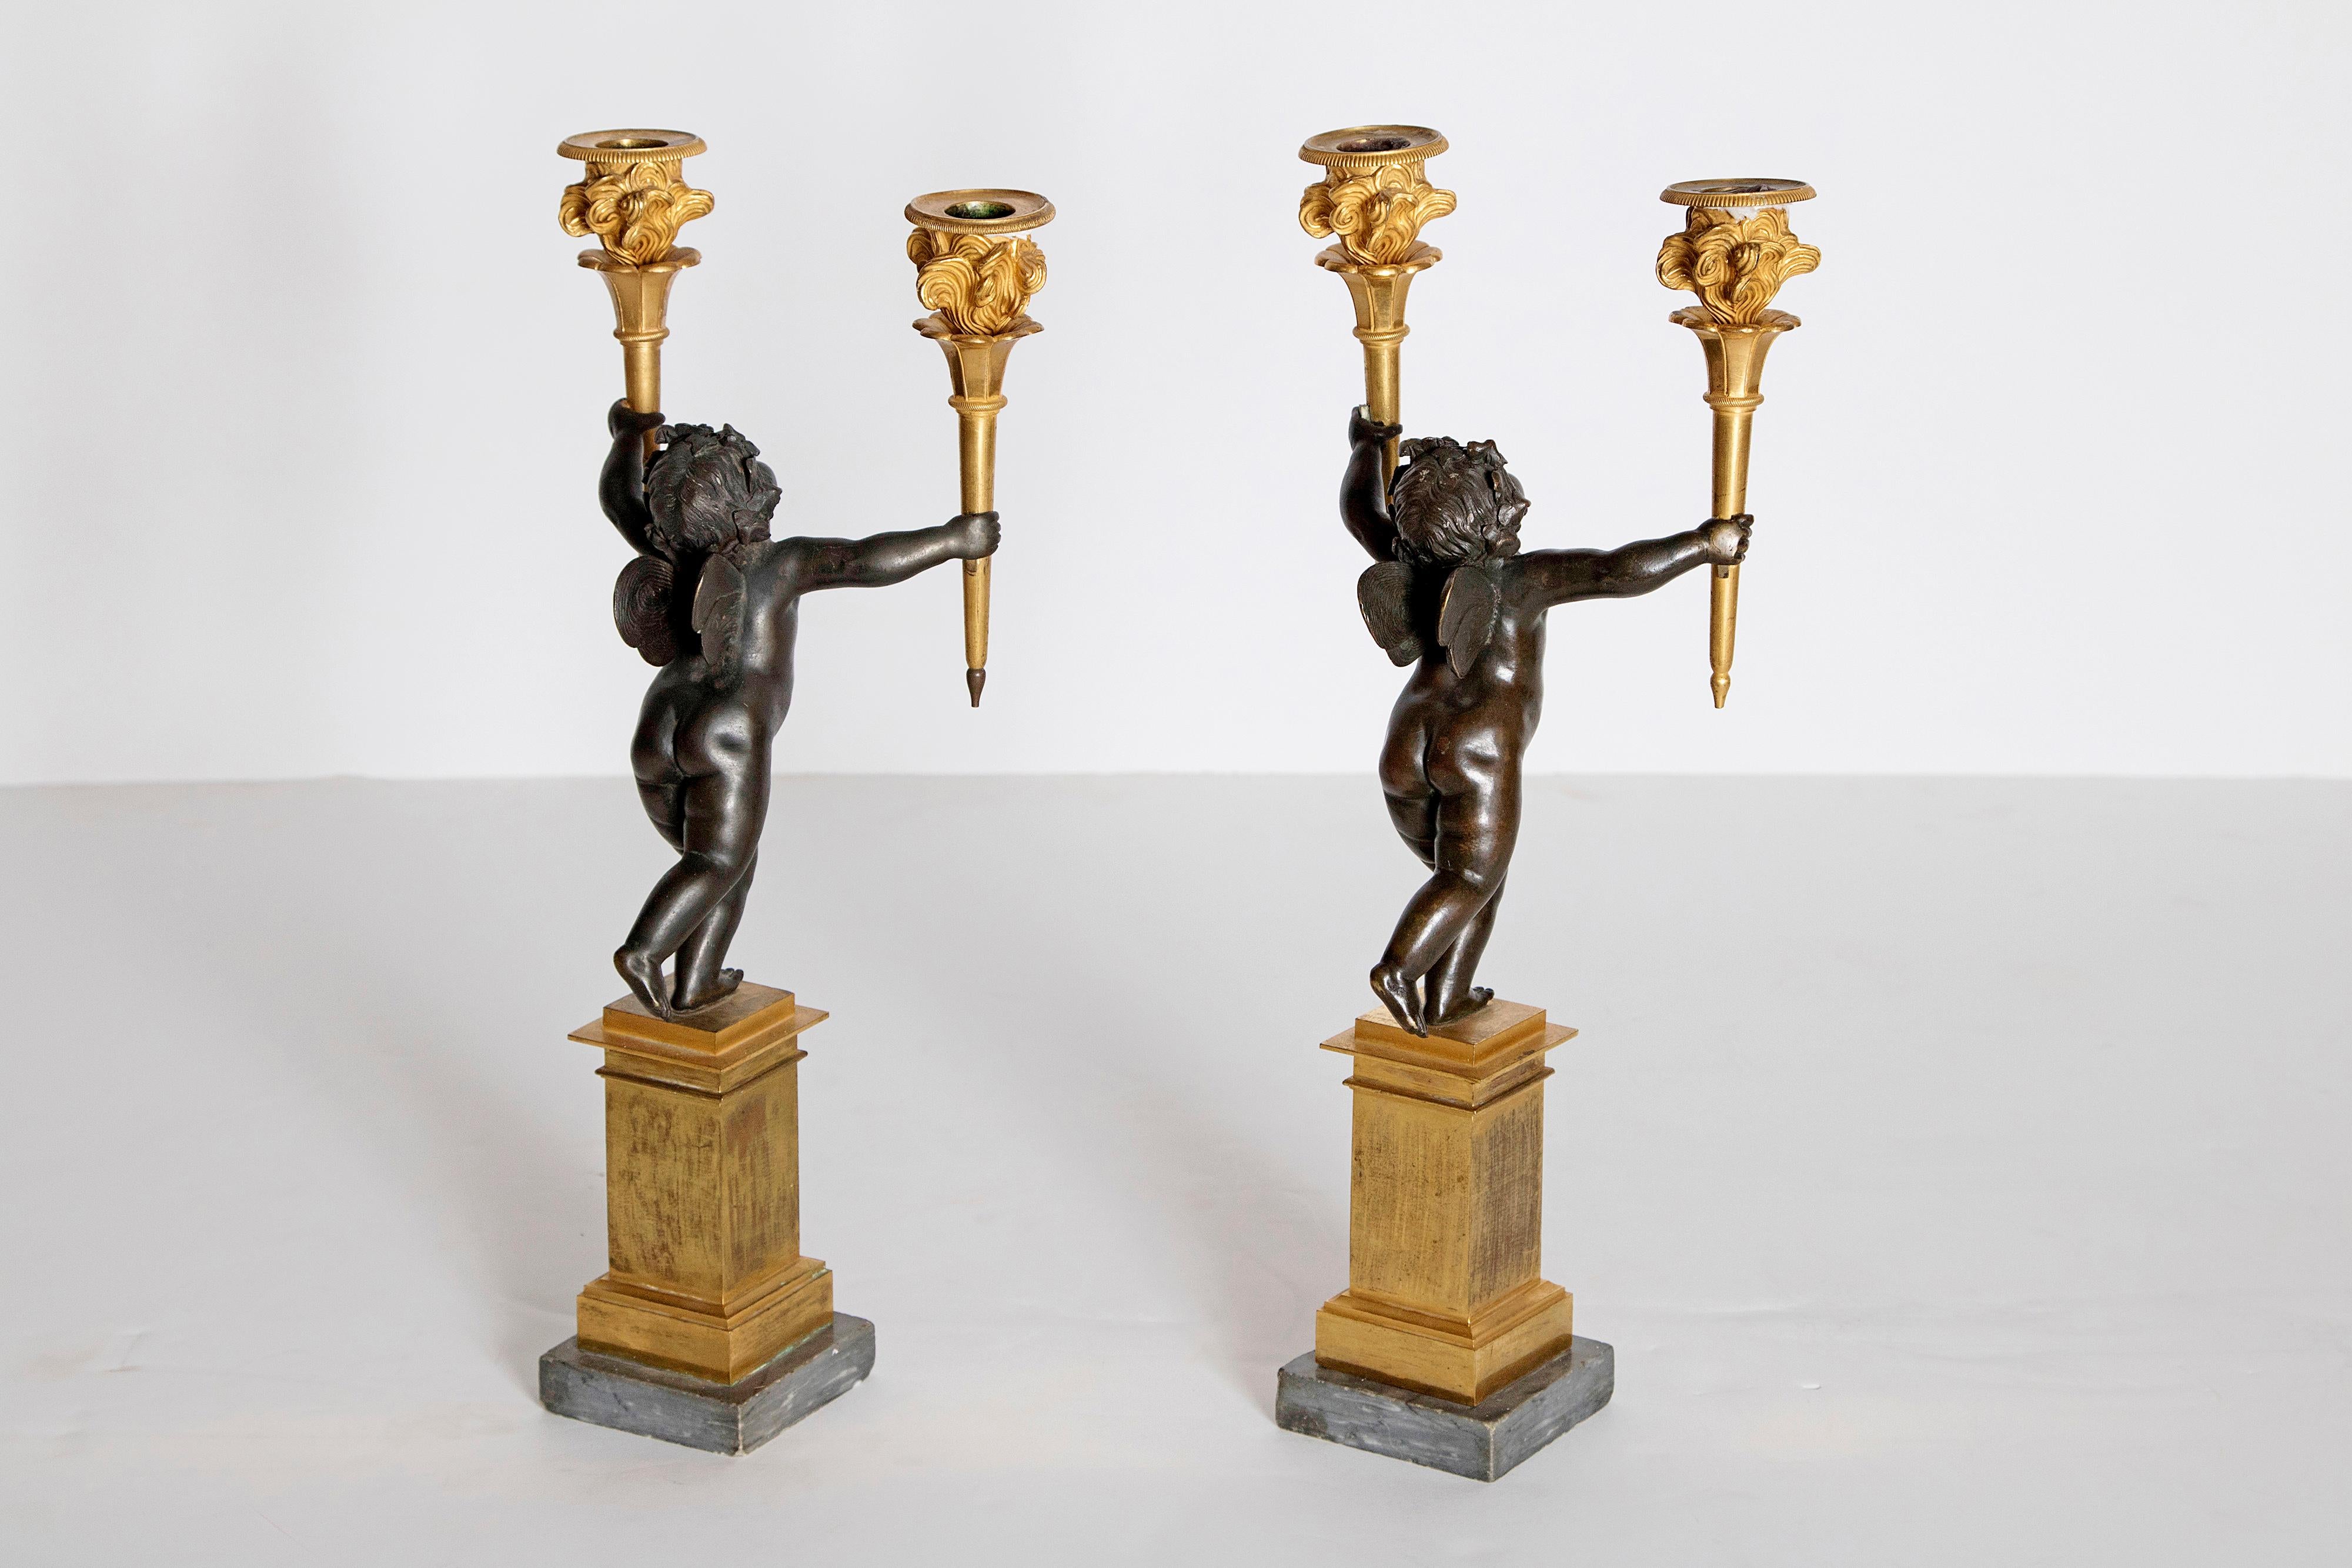 Pair of French Charles X Patinated Bronze and Gilt Figurative Candelabras For Sale 1